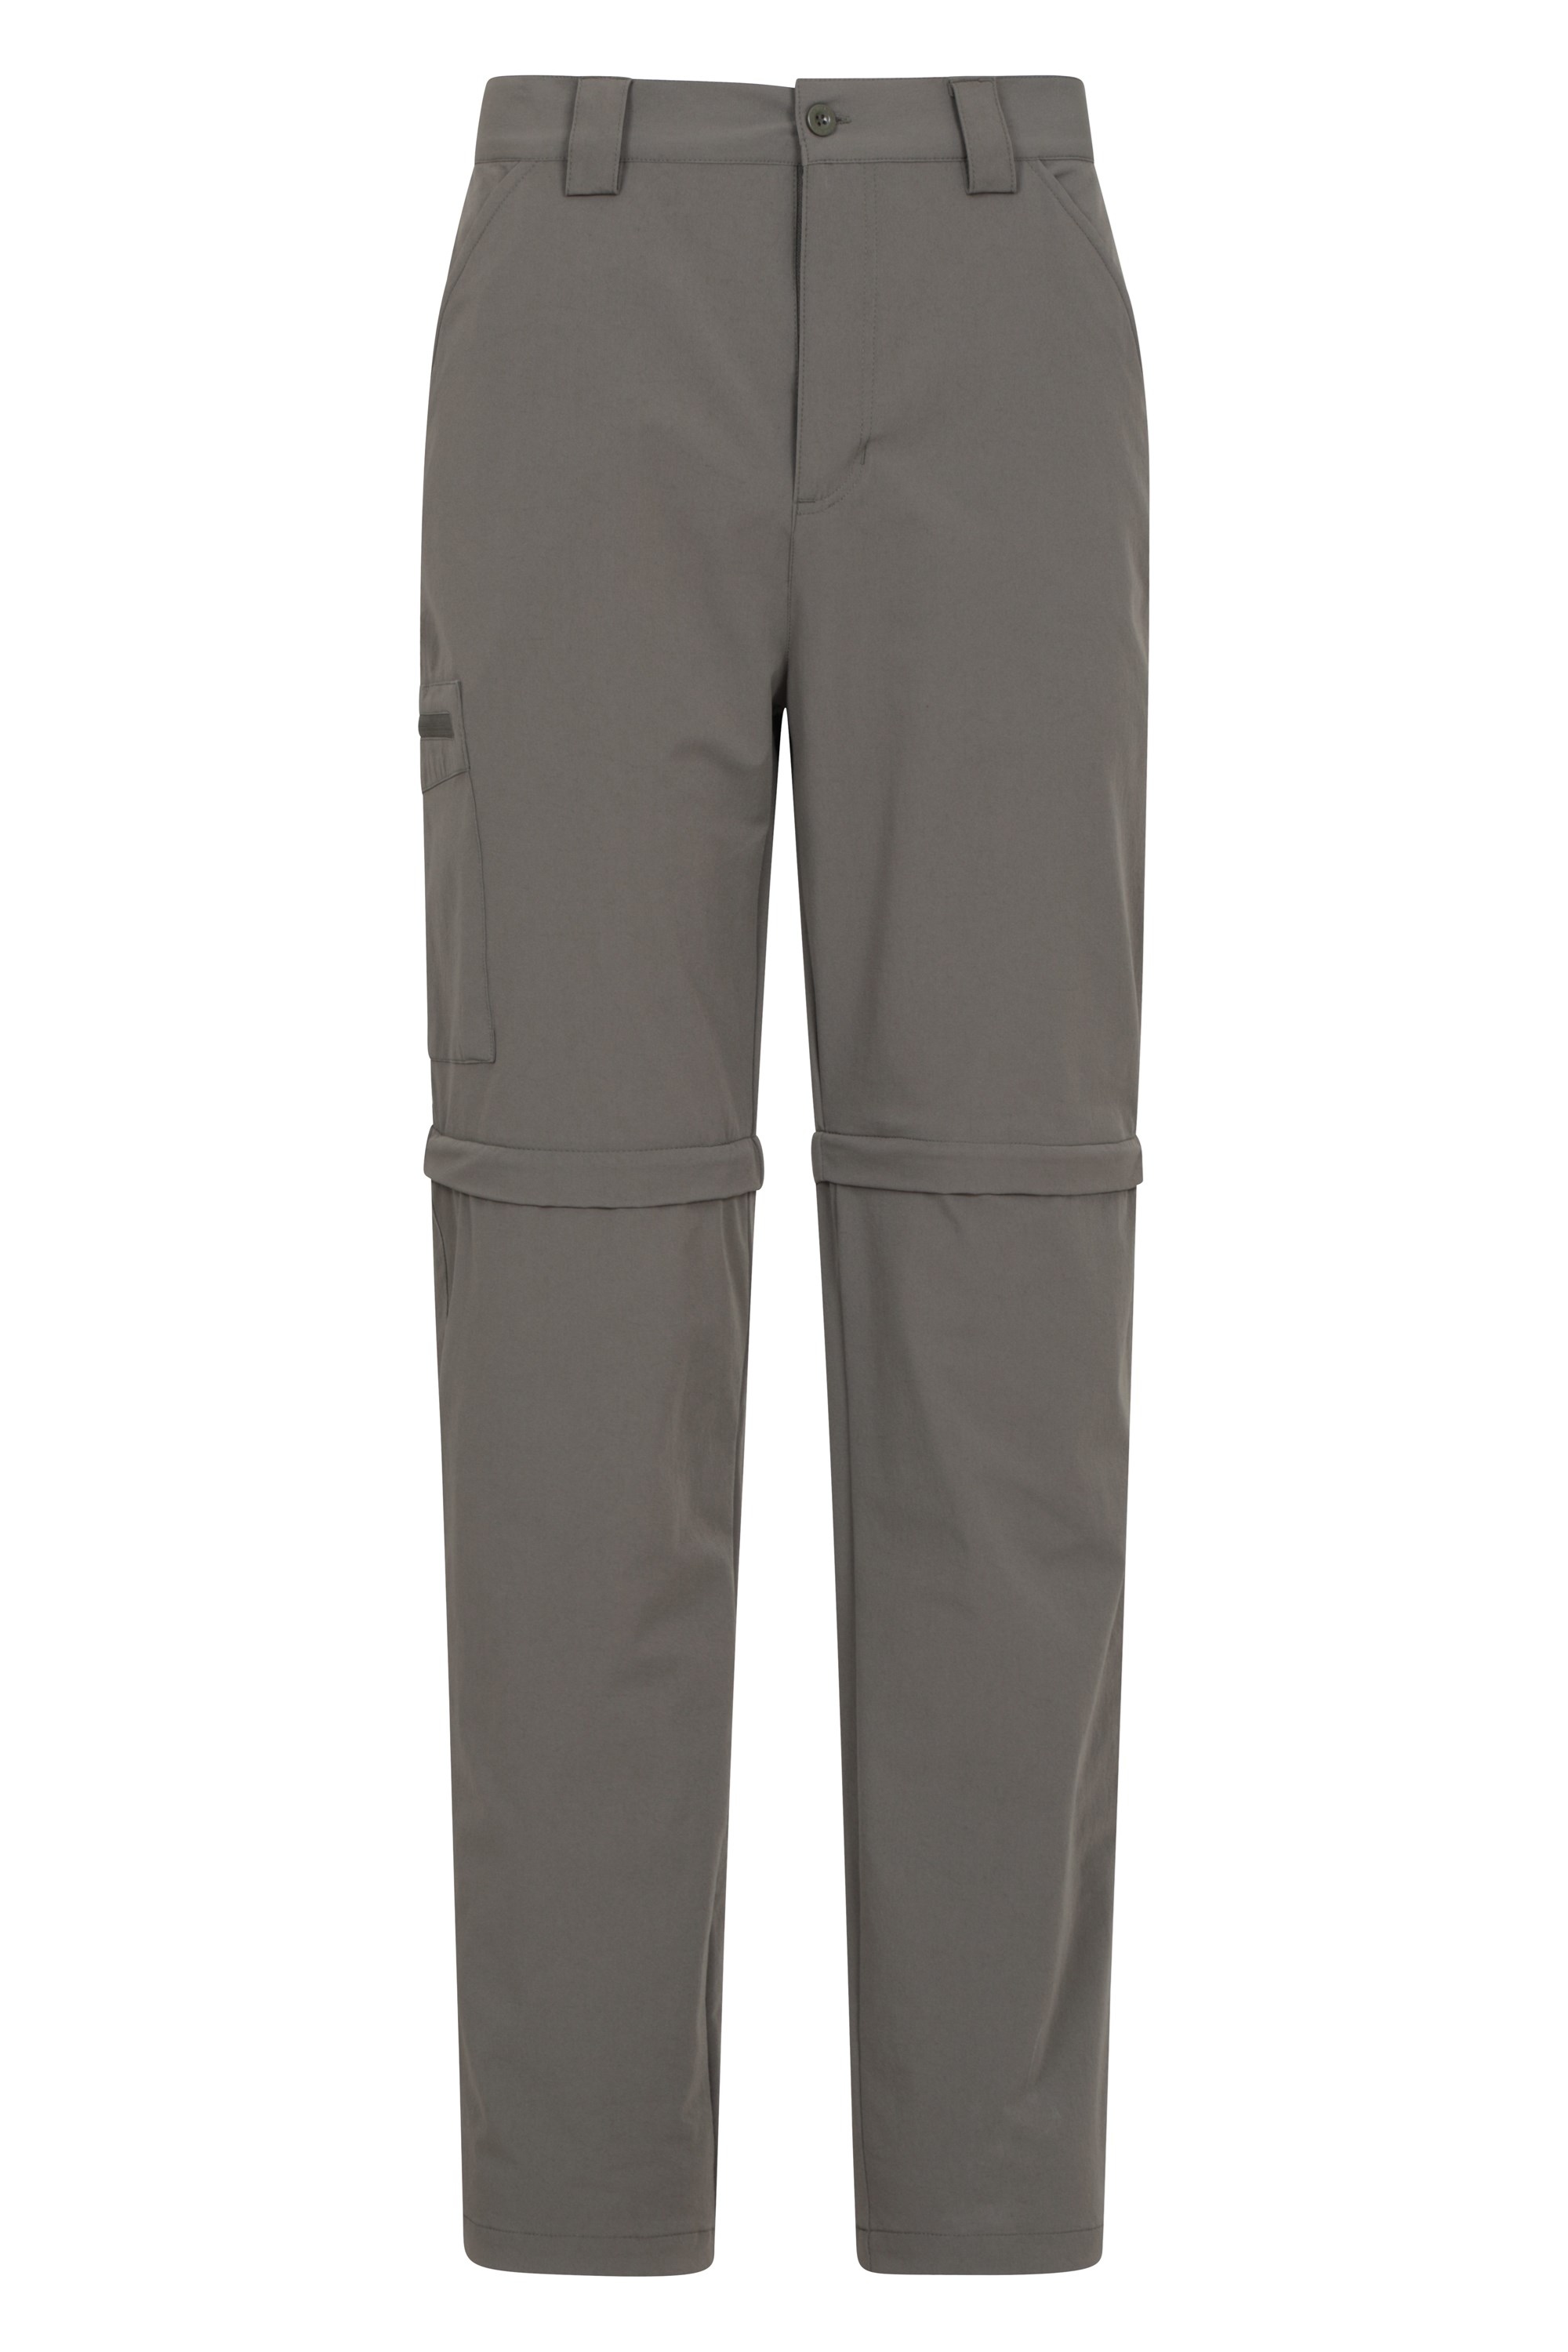 Beam Mens Zip-Off Stretch Trousers - Green